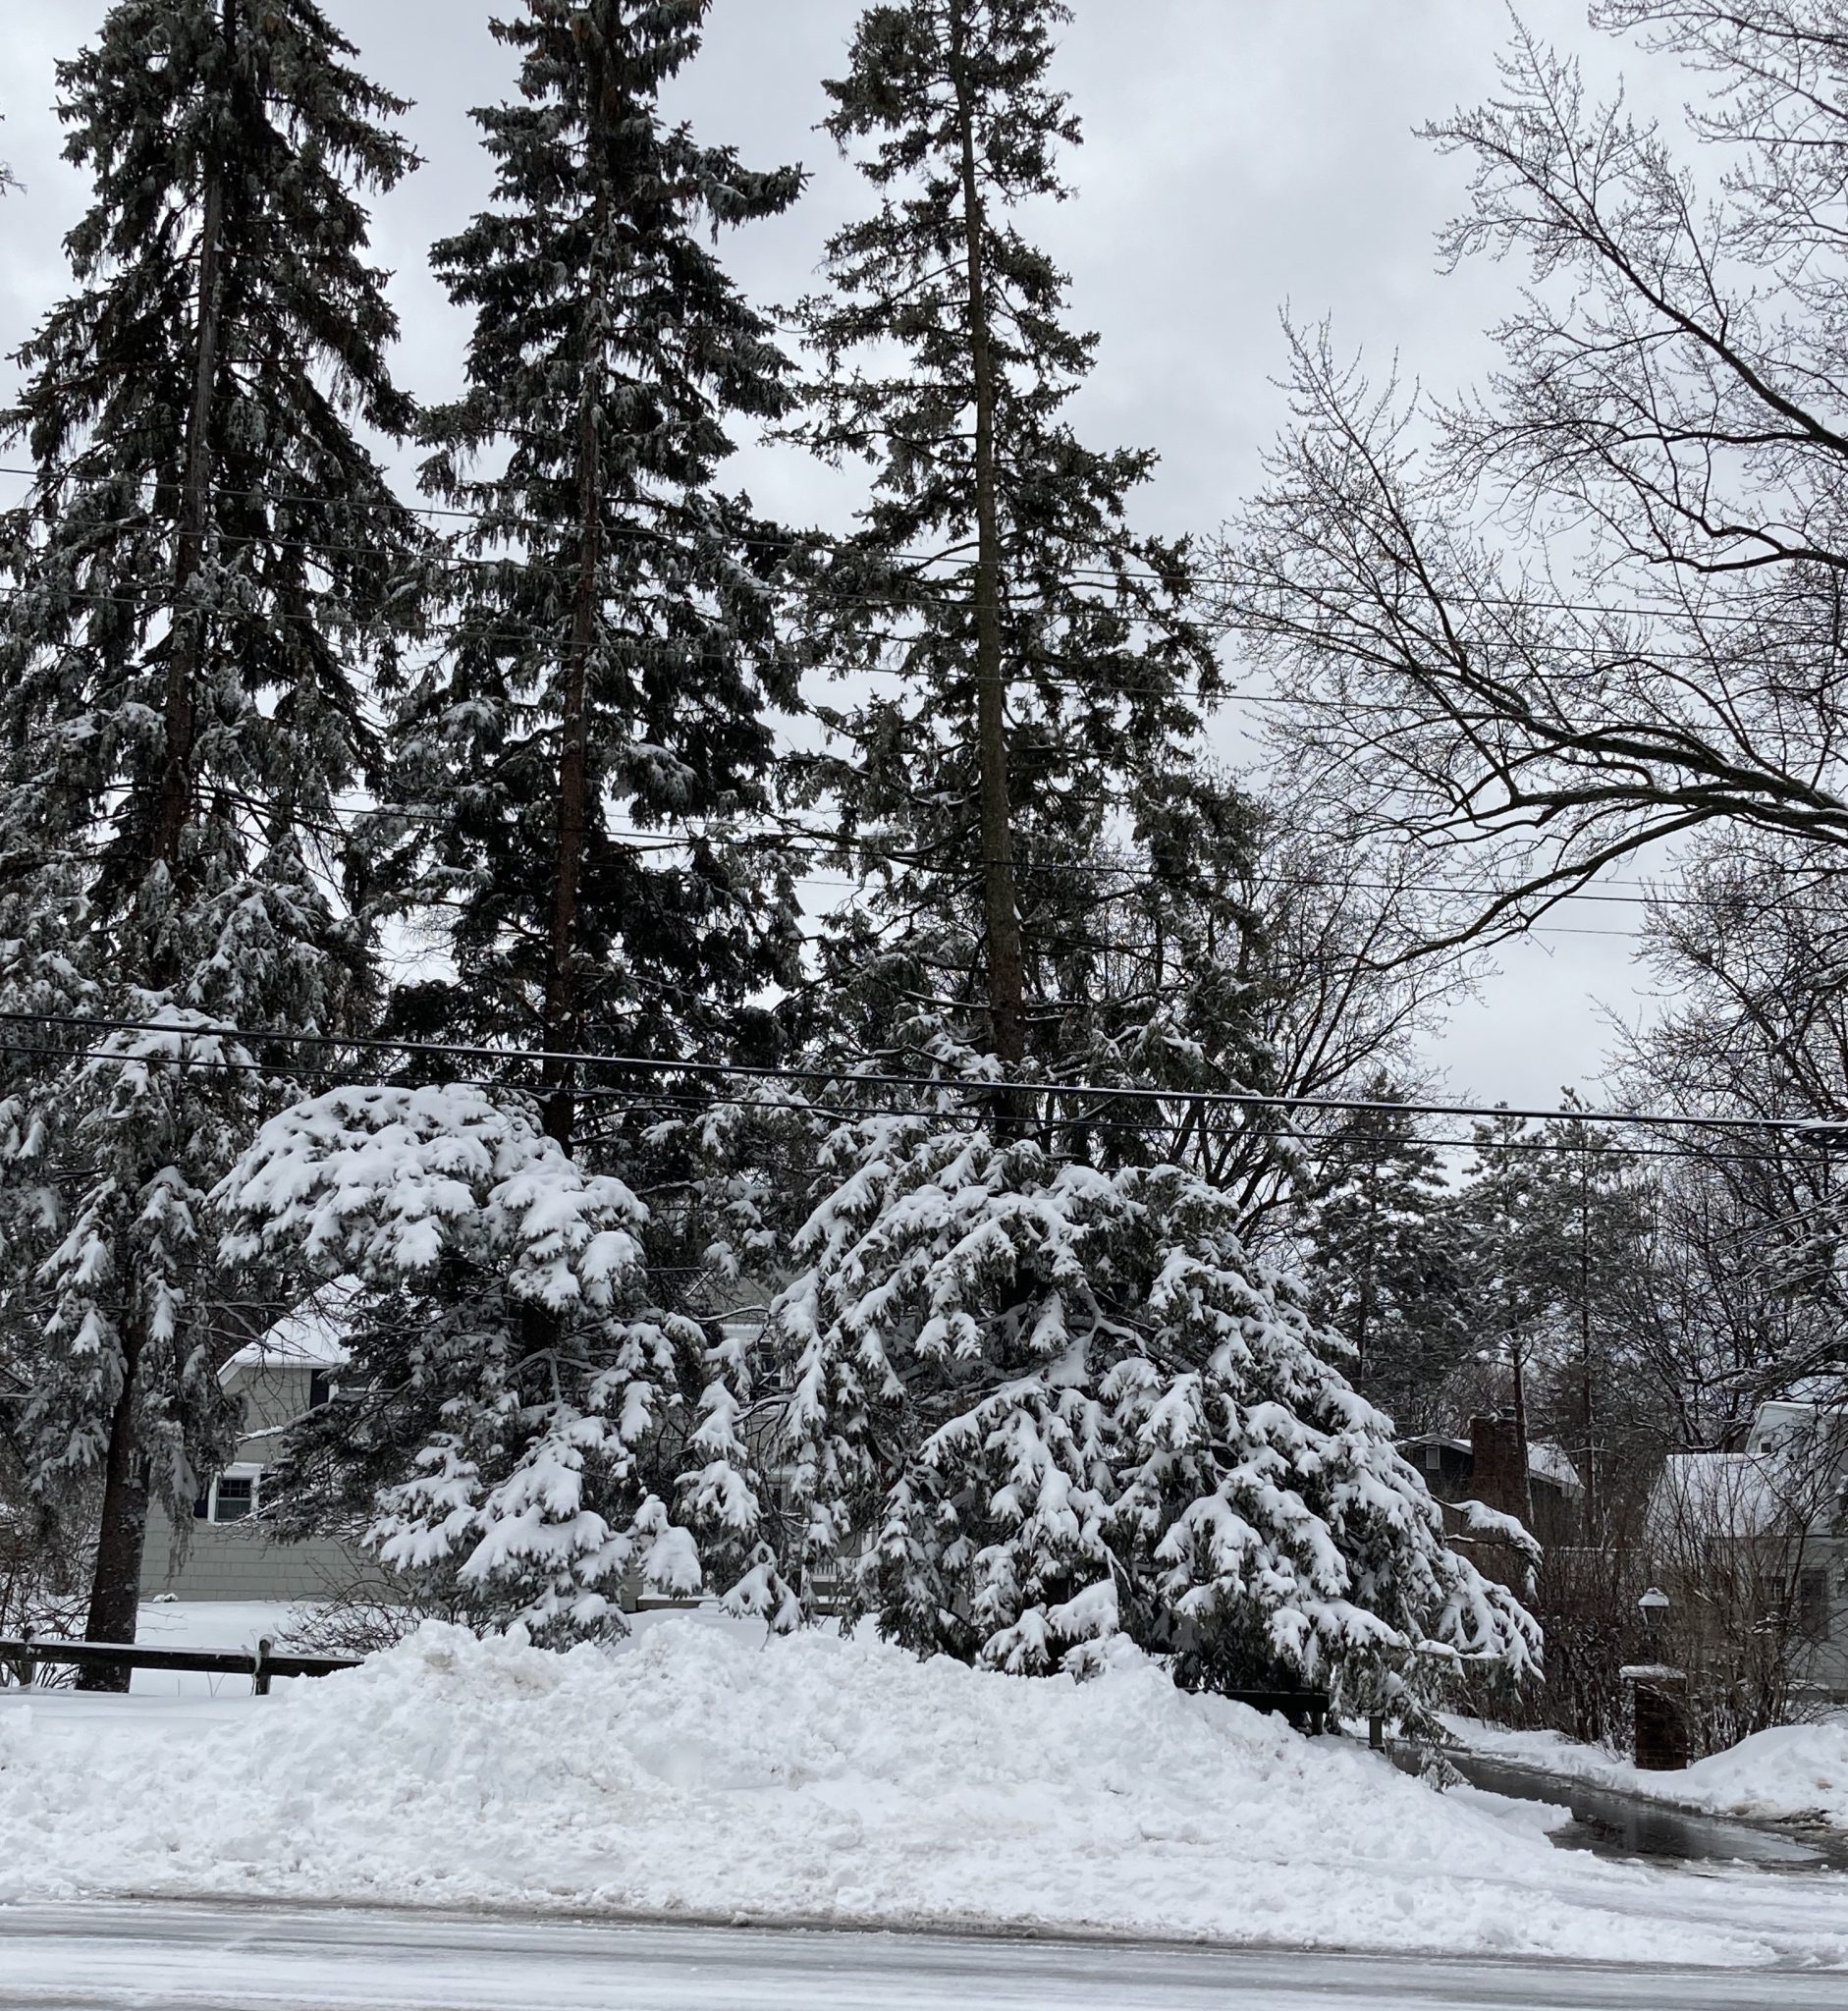 Street view of snow covered trees.